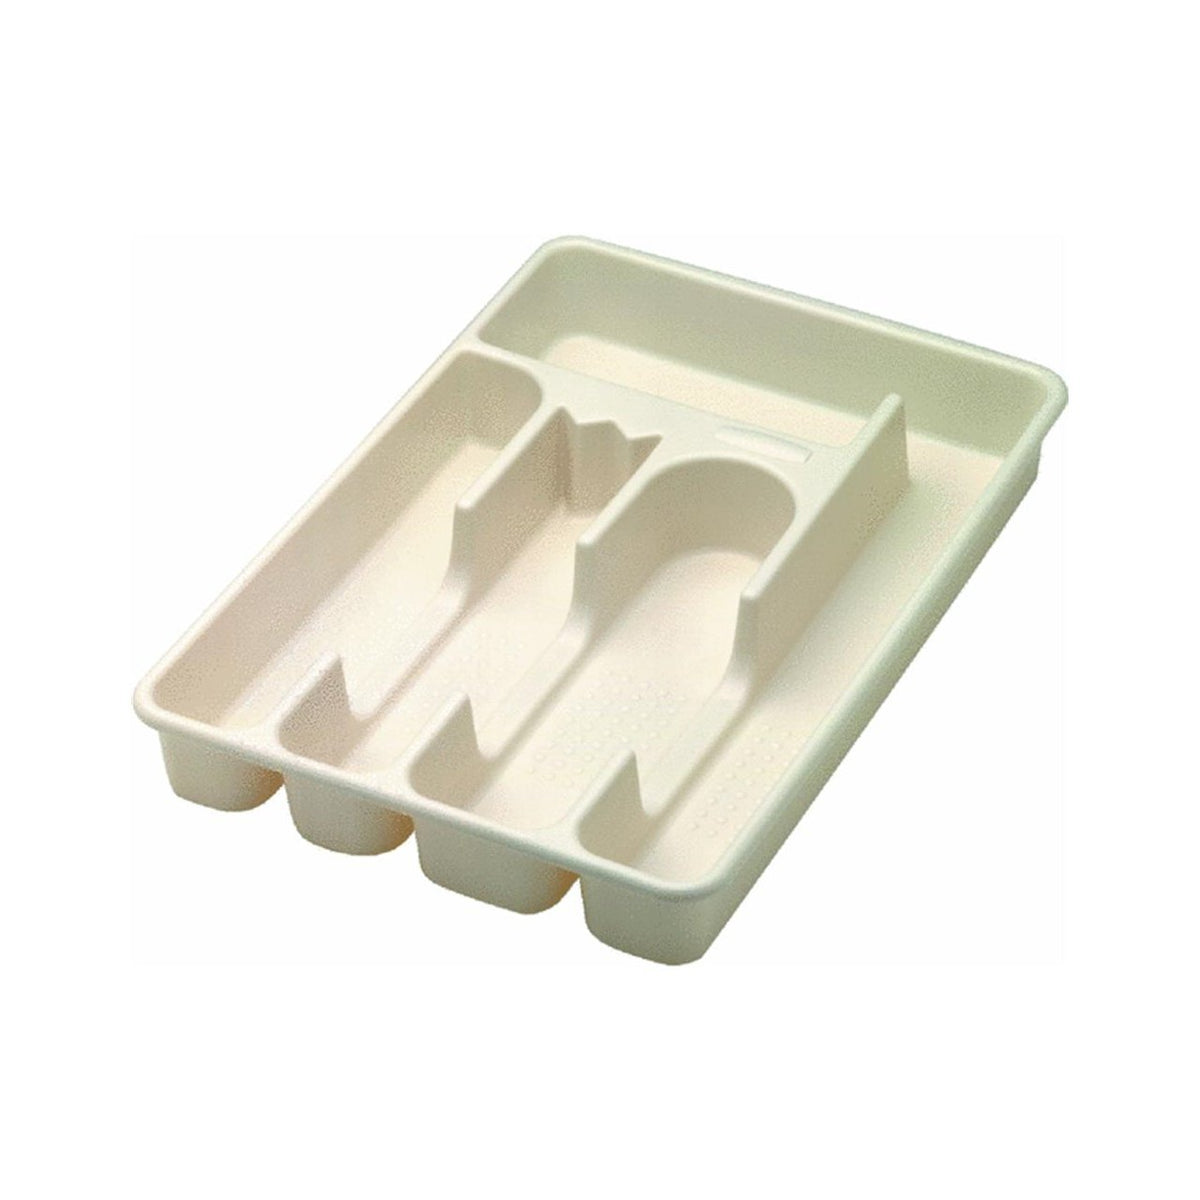 buy kitchen cutlery trays at cheap rate in bulk. wholesale & retail storage & organizers items store.